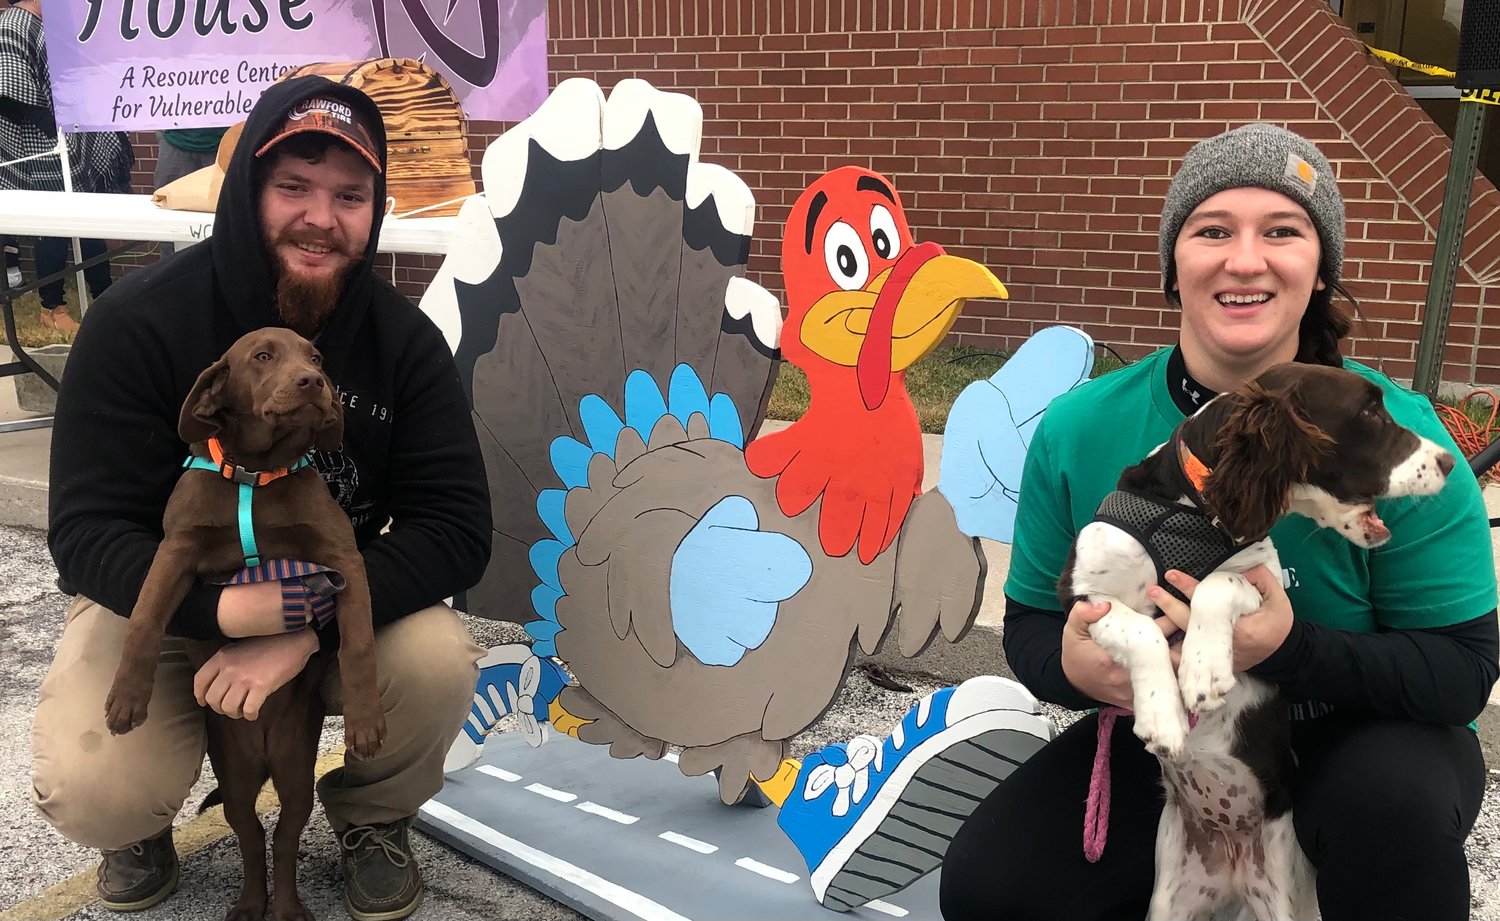 (Left to right) Dallas Cooley, Haley Kilburn and their puppies, Harper and Bella, ready to walk the Webster County Health Unit’s 11th annual Gobble Wobble.